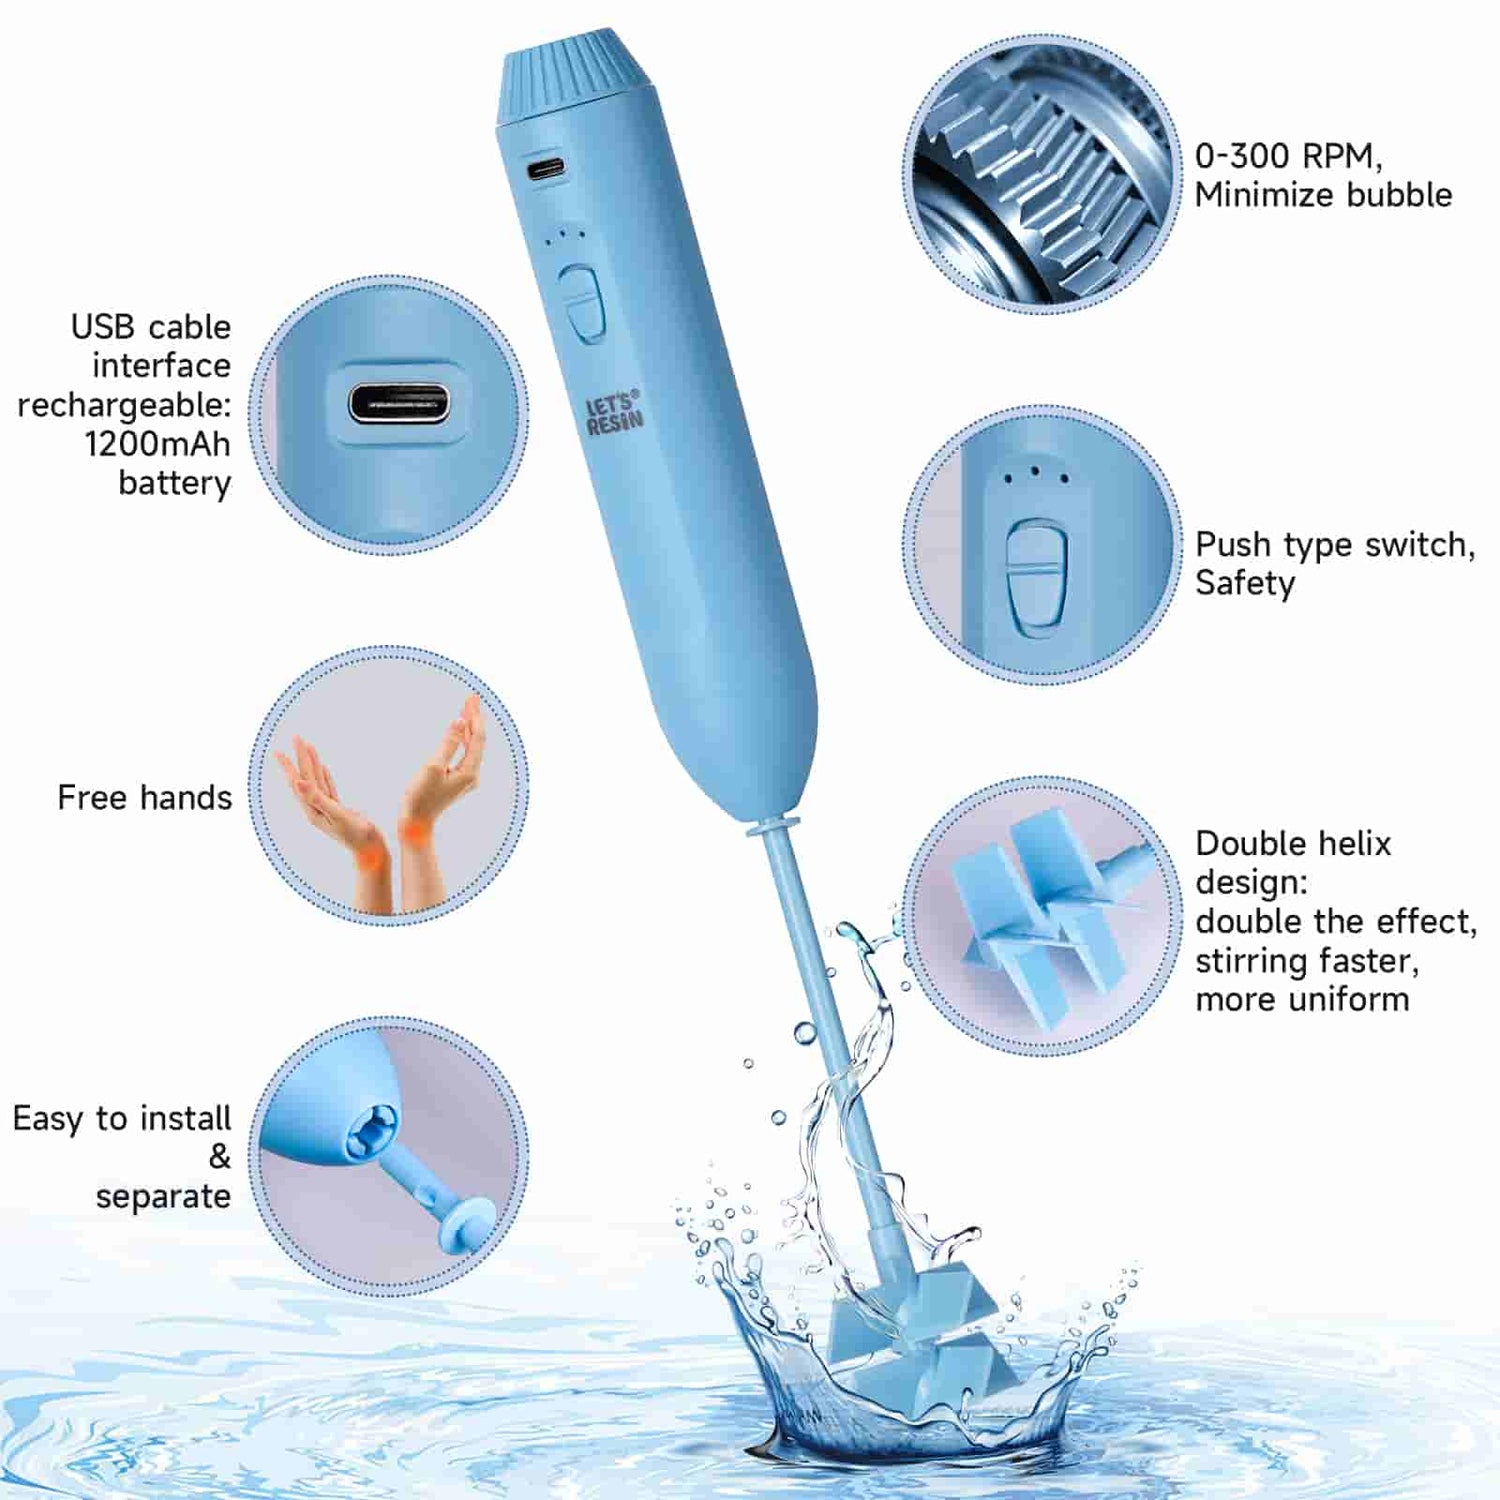 Electric Epoxy Resin Mixer Handheld Resin Stirrer with 4 Reusable